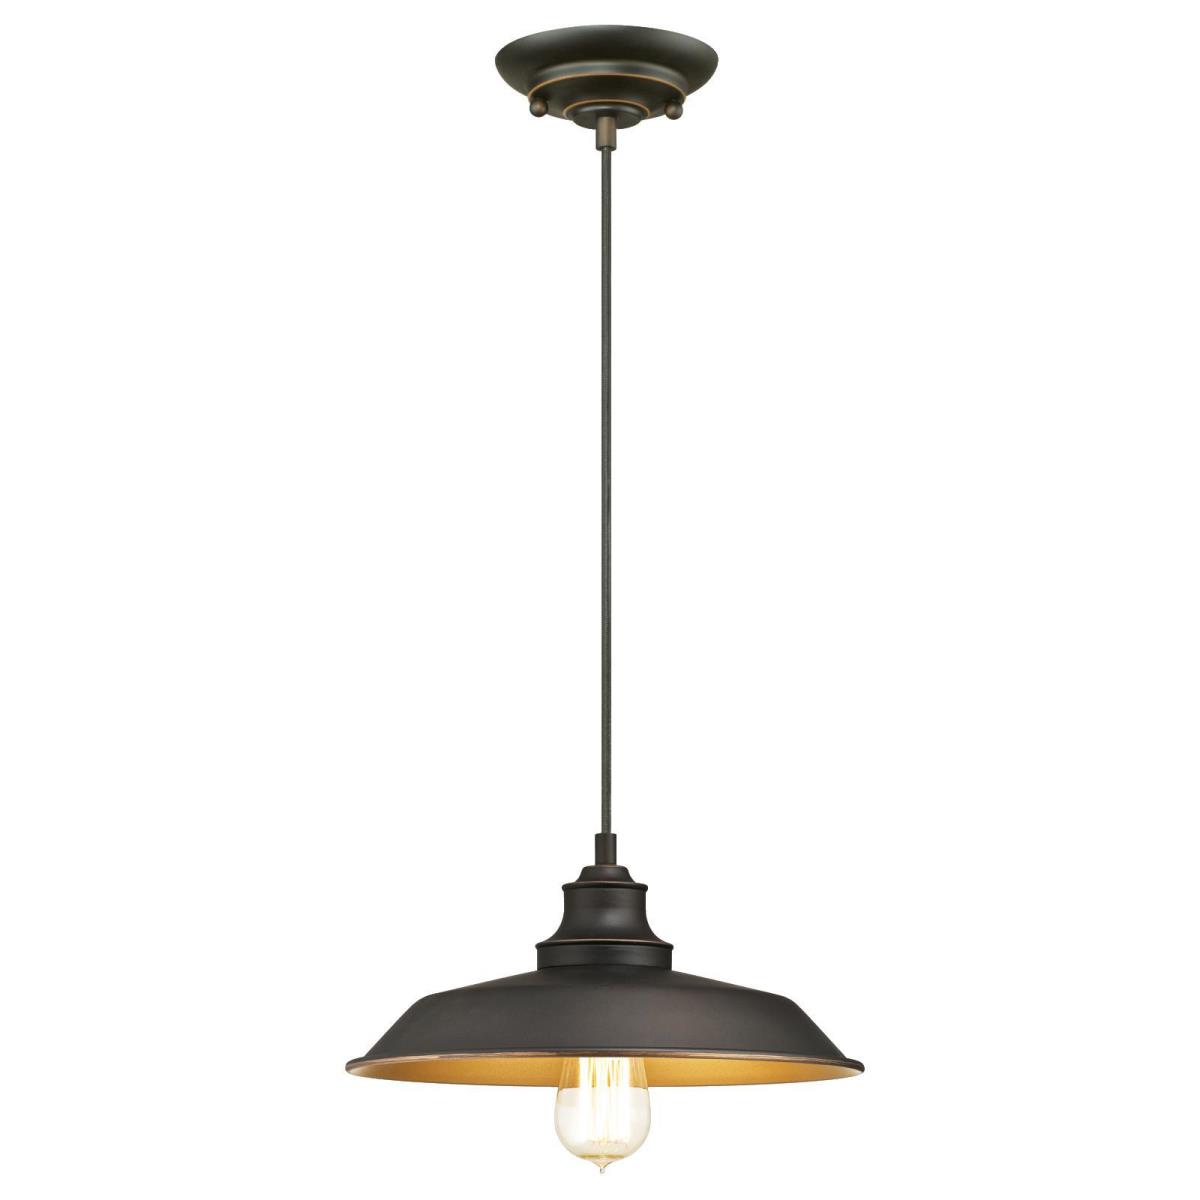 1 Light Pendant Oil Rubbed Bronze Finish with Highlights and Metallic Bronze Interior